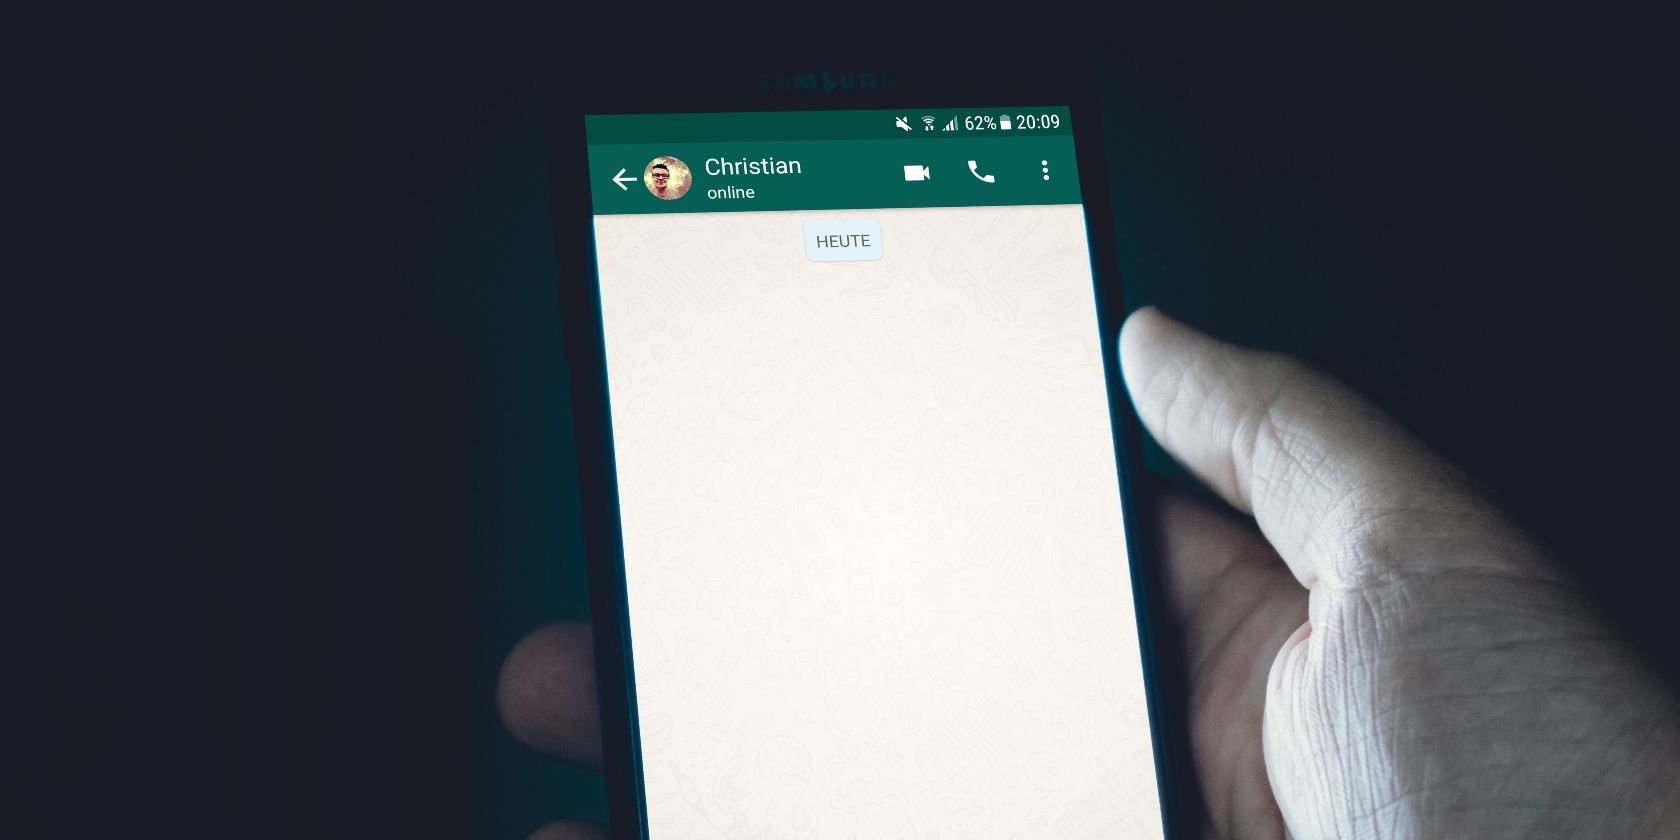 WhatsApp Voice Calling: Everything You Need to Know